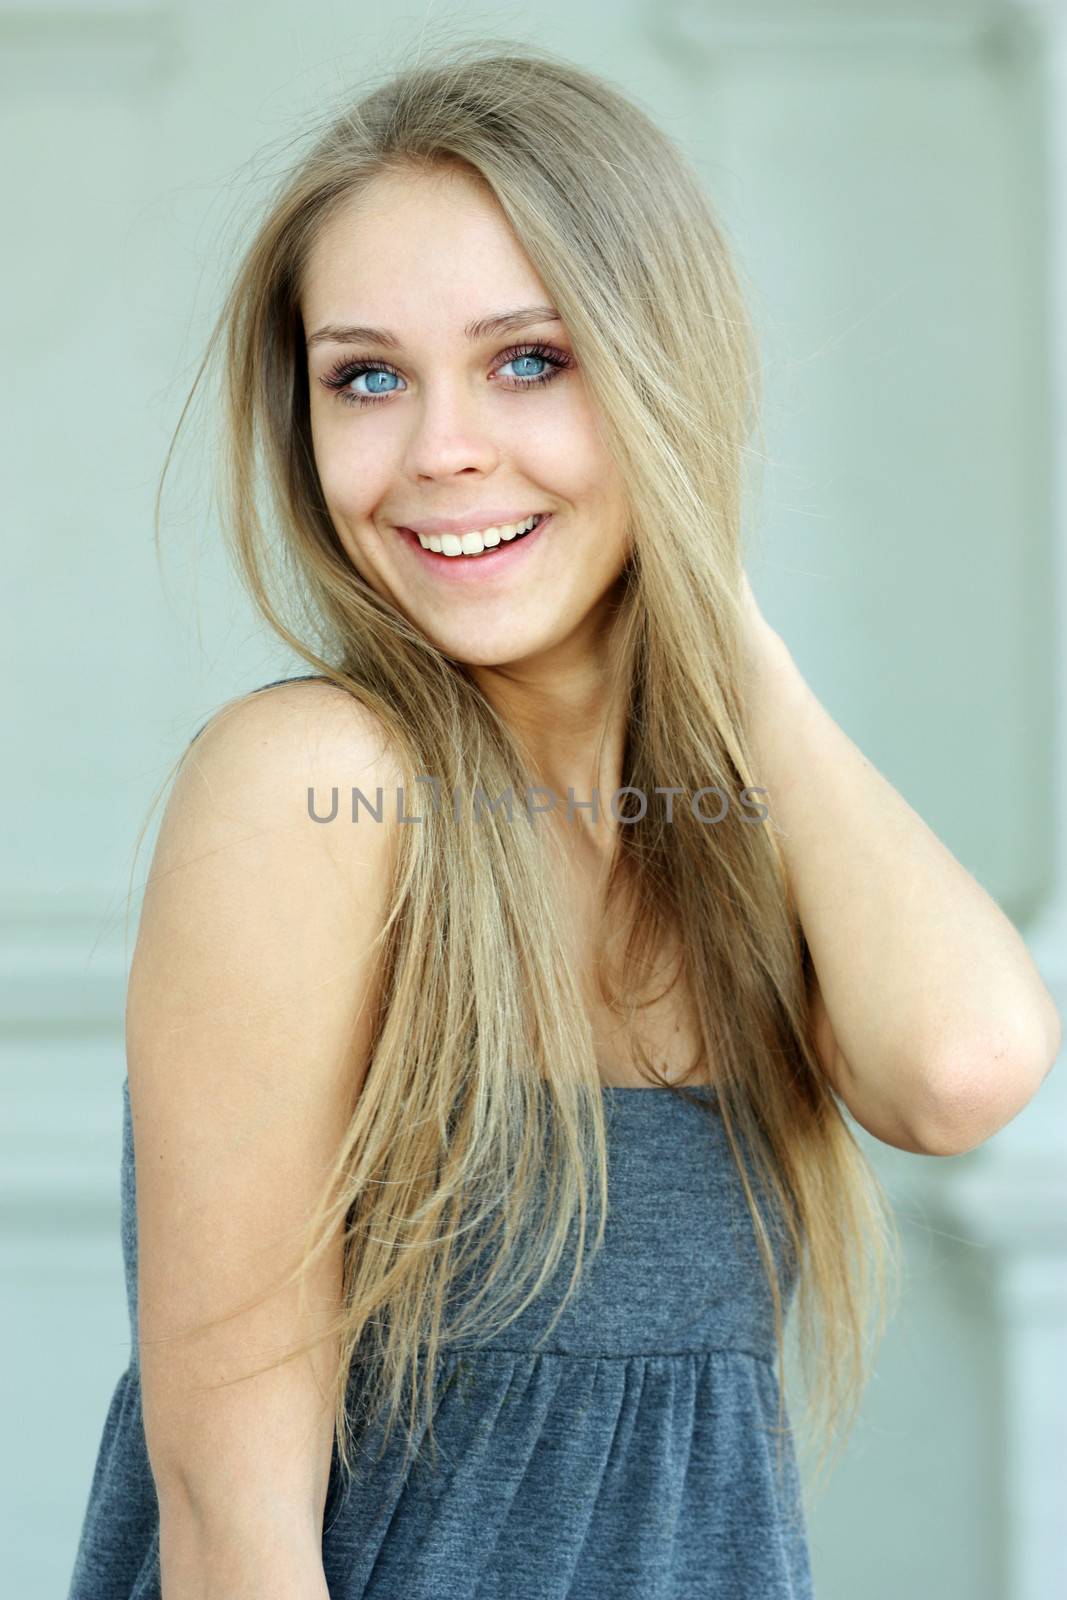 Beautiful young girl smiling. Outdoor portrait